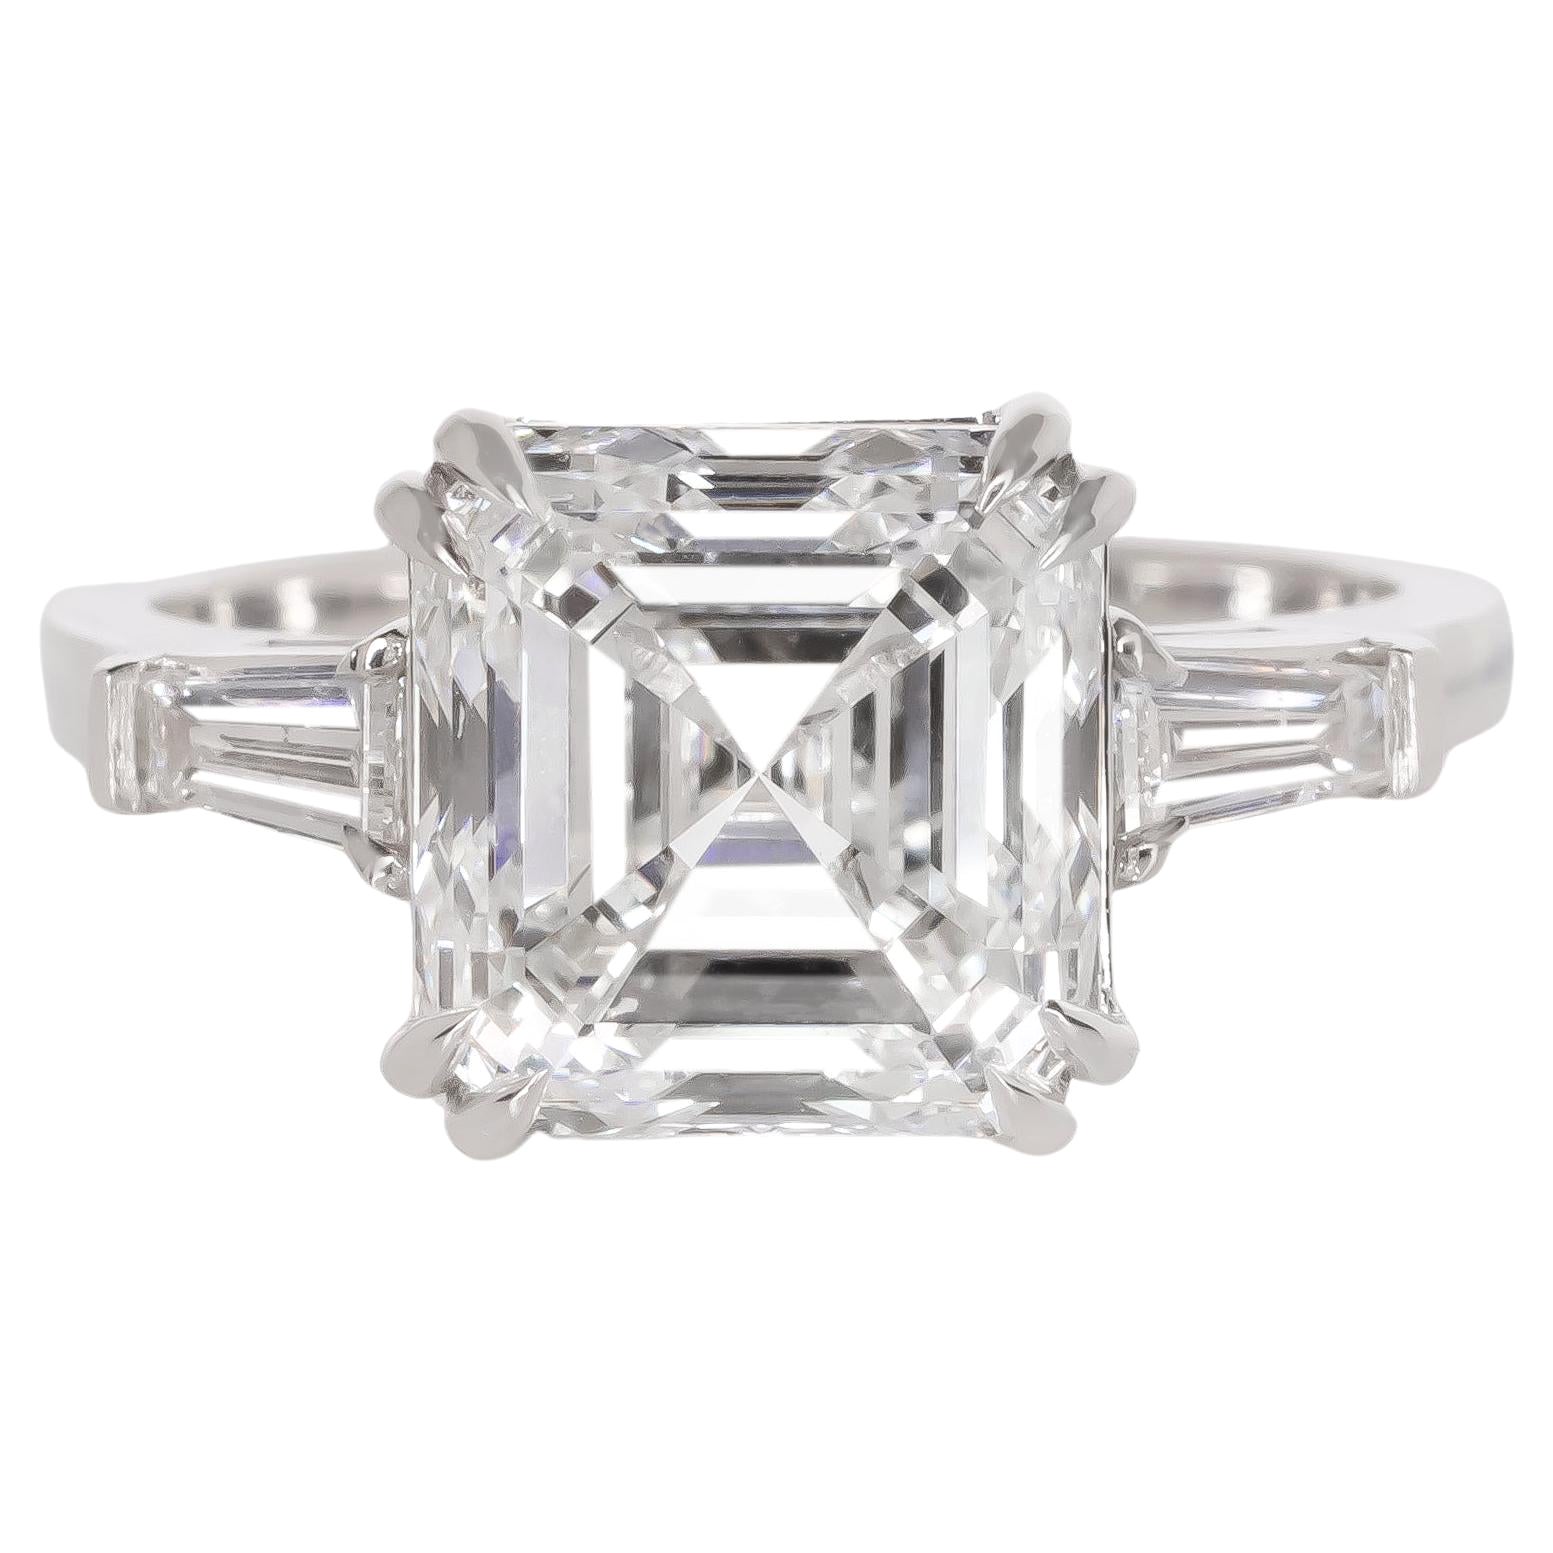 EXCEPTIONAL GIA Certified 5 Carat VS2 Asscher Cut Diamond Ring For Sale